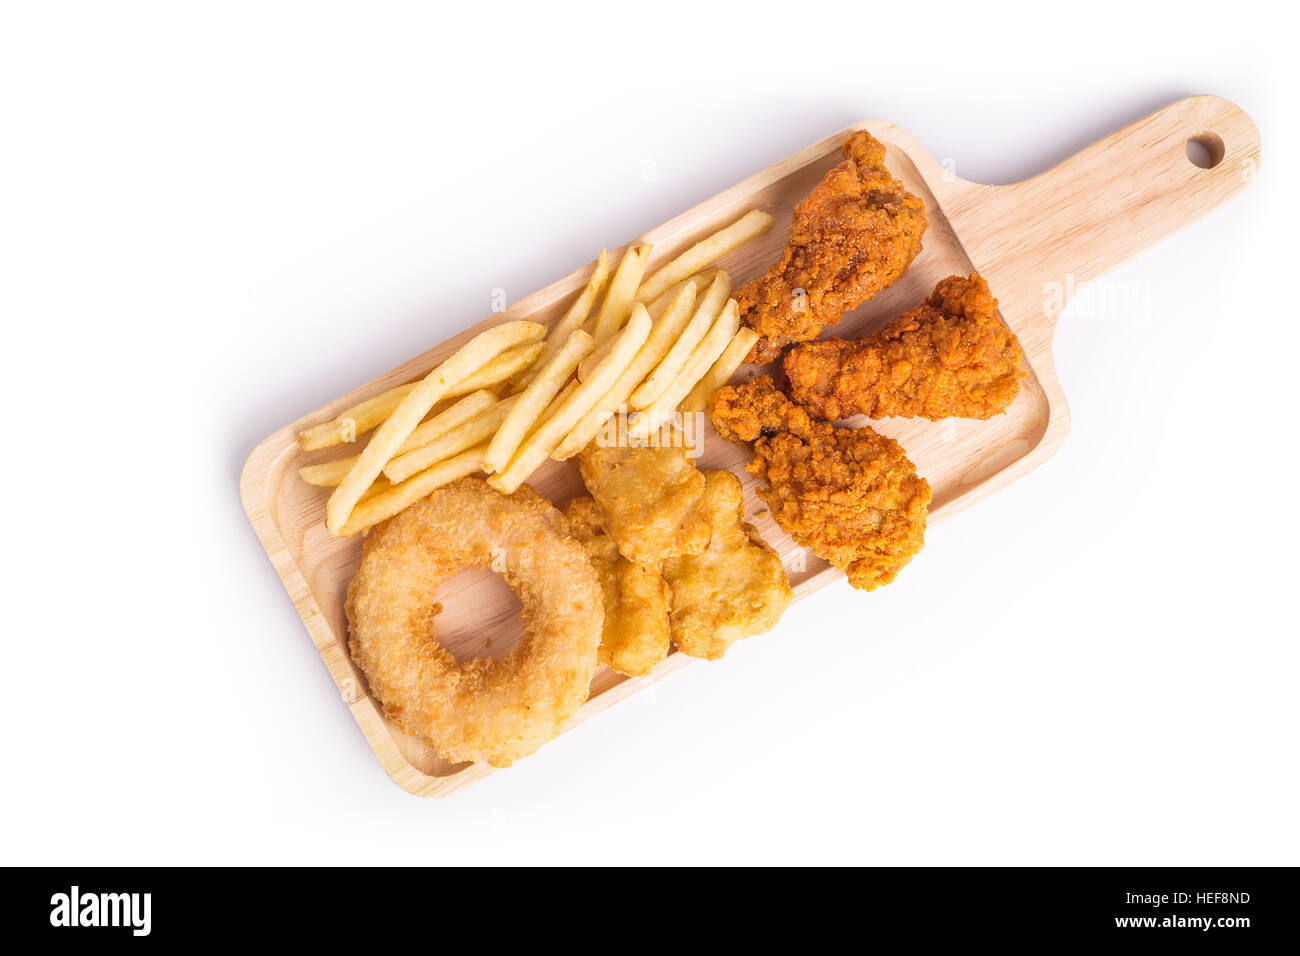 Close up fried chicken, french fries and soft drink on wooden table Stock Photo